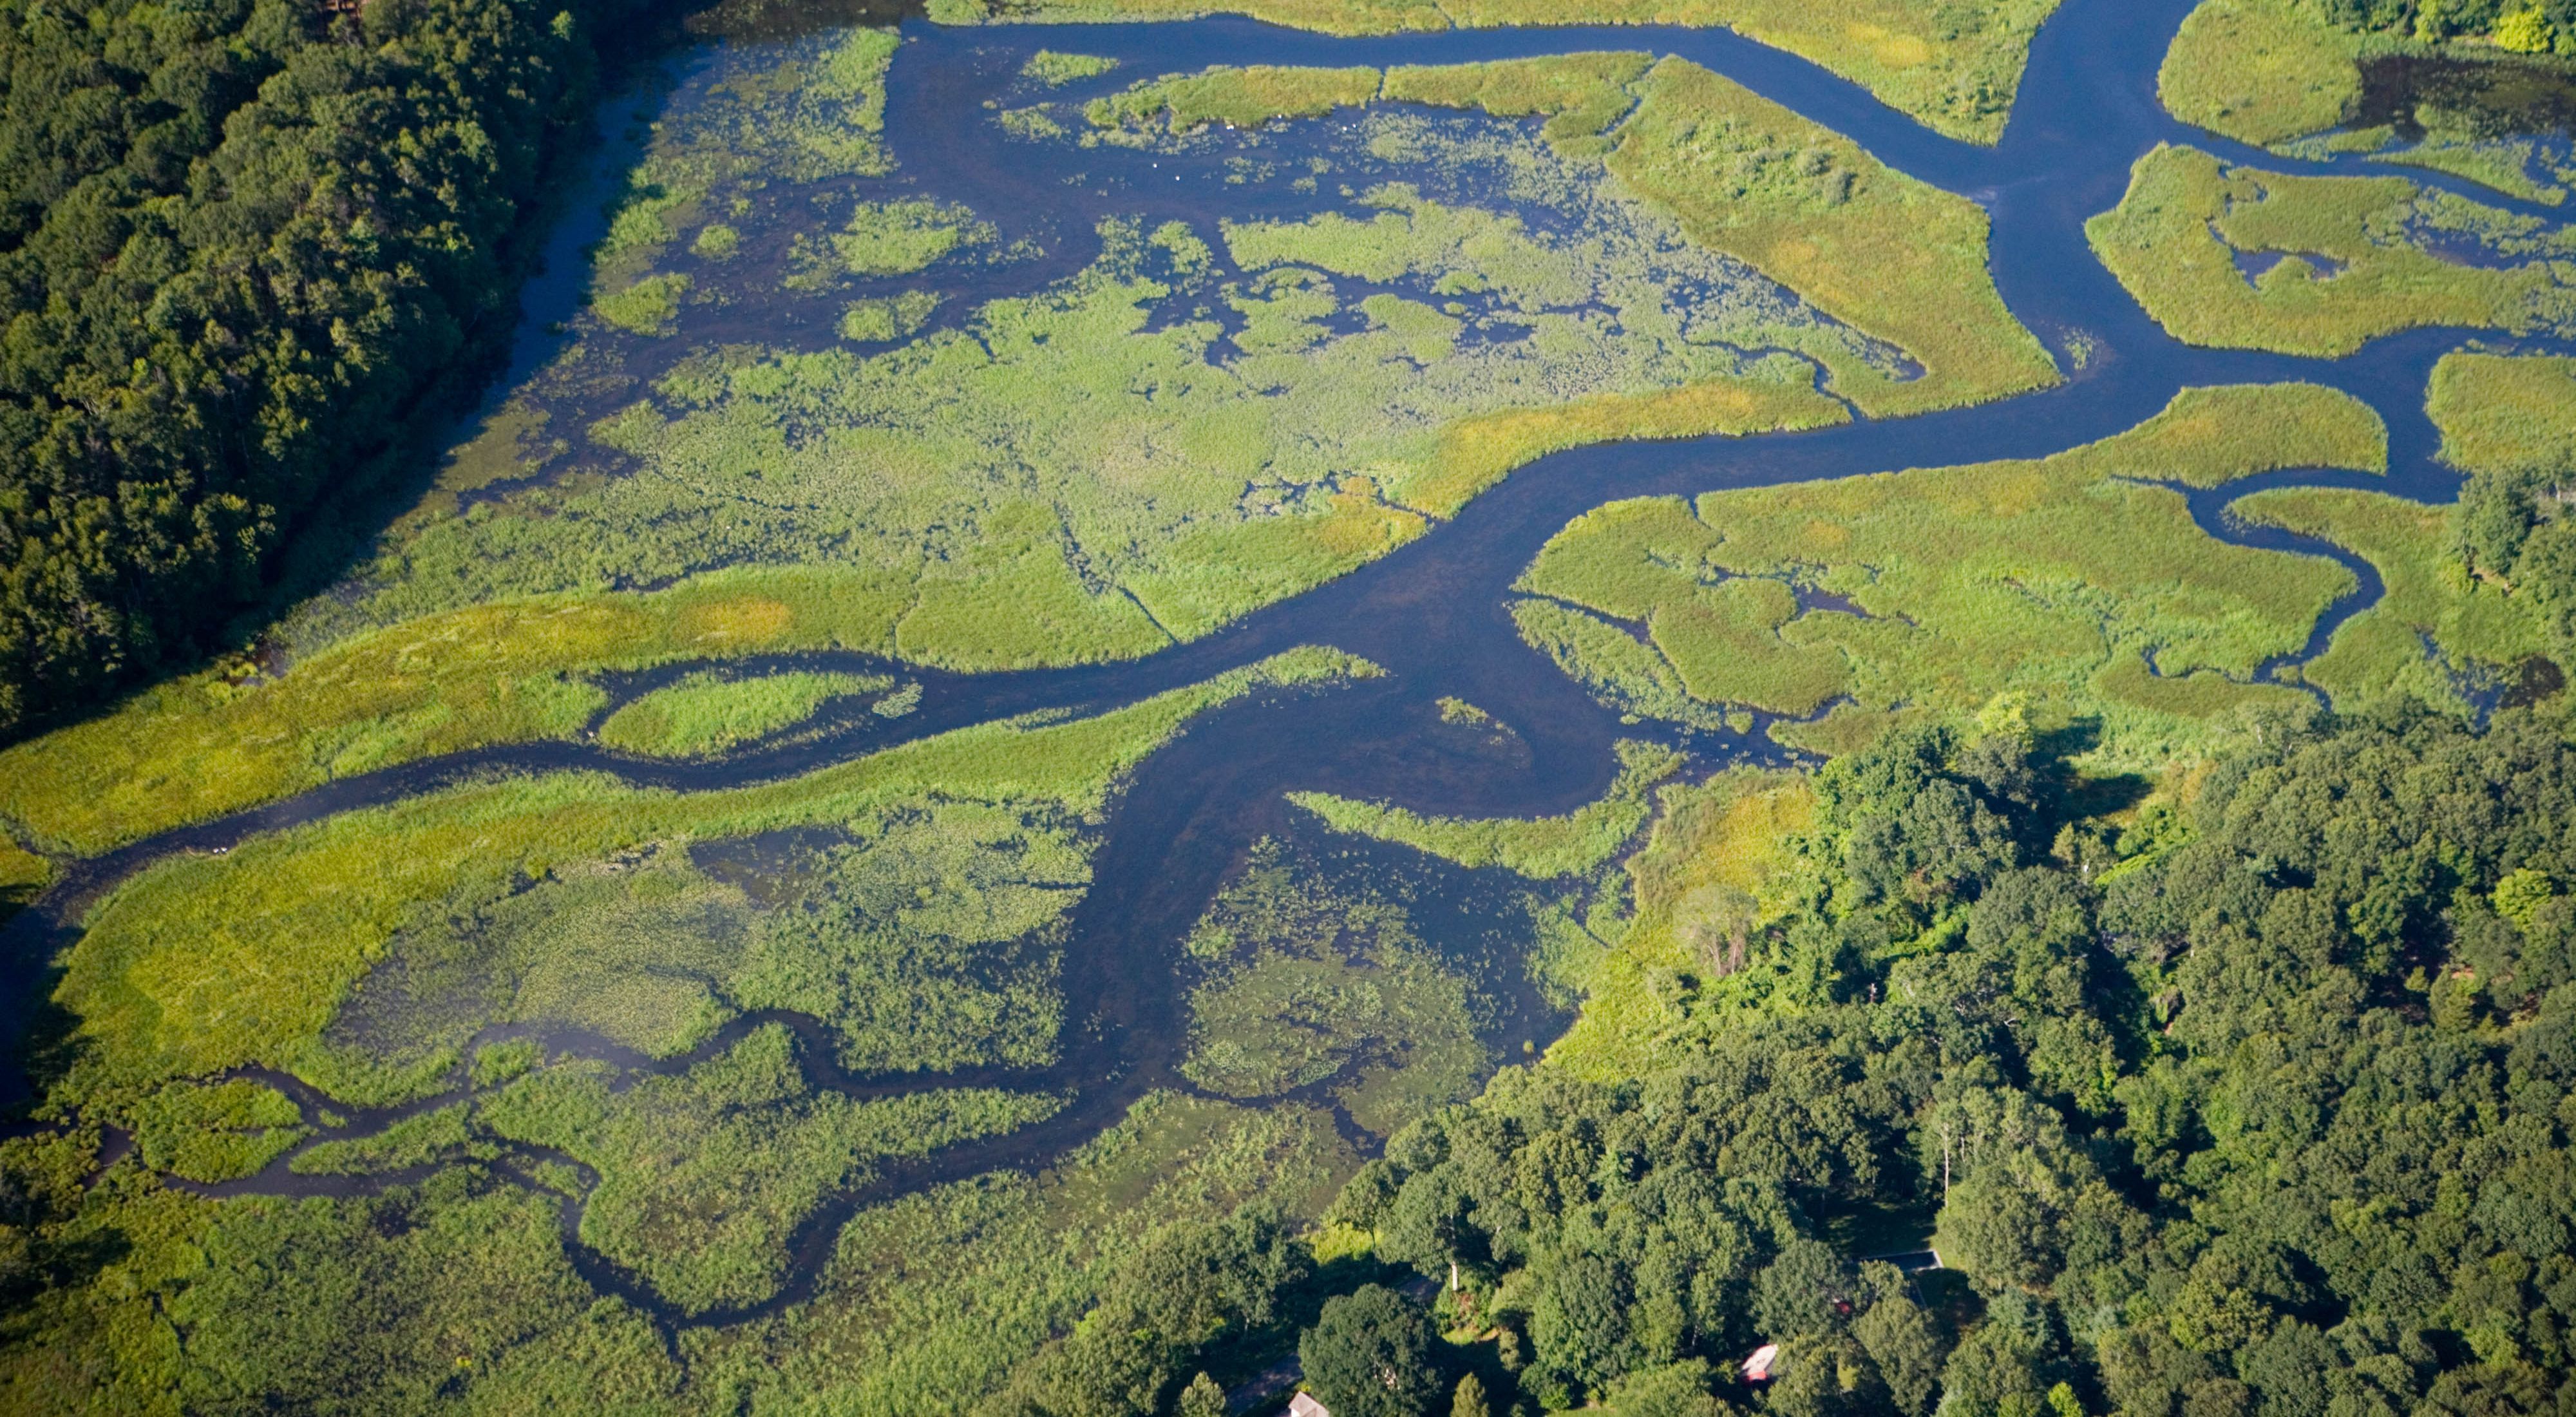 Aerial view of a river winding through a forest.